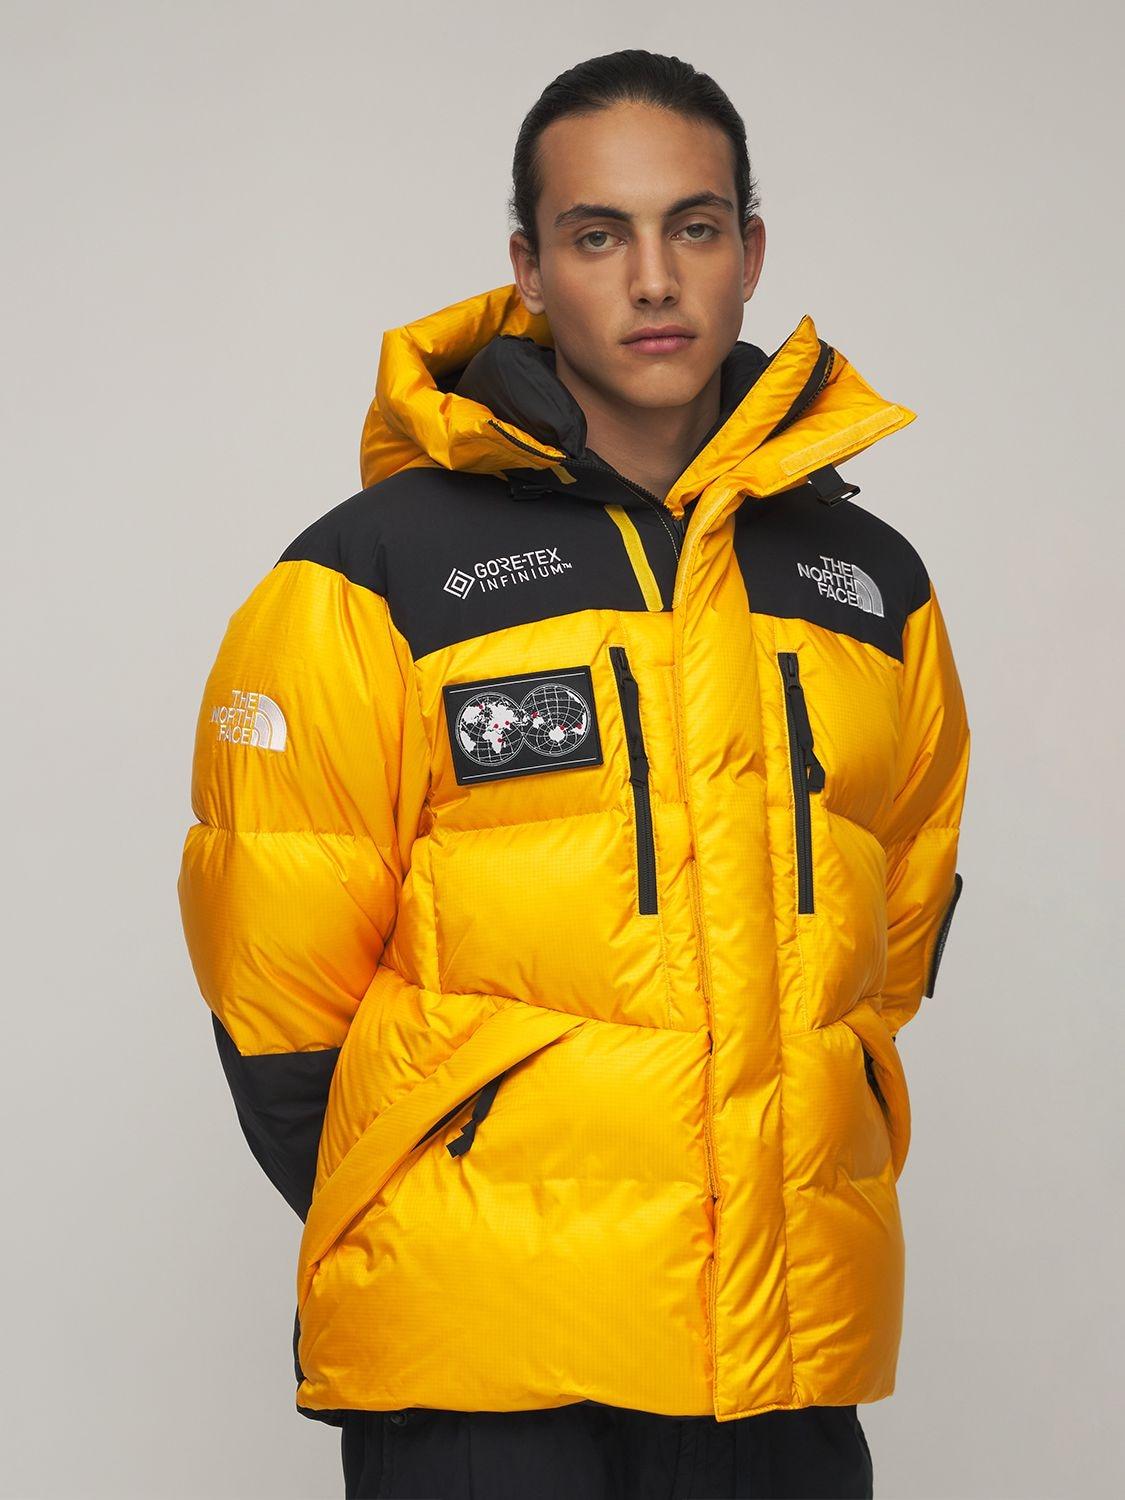 The North Face 7se Himalayan Gore-tex Parka in Yellow for Men - Lyst